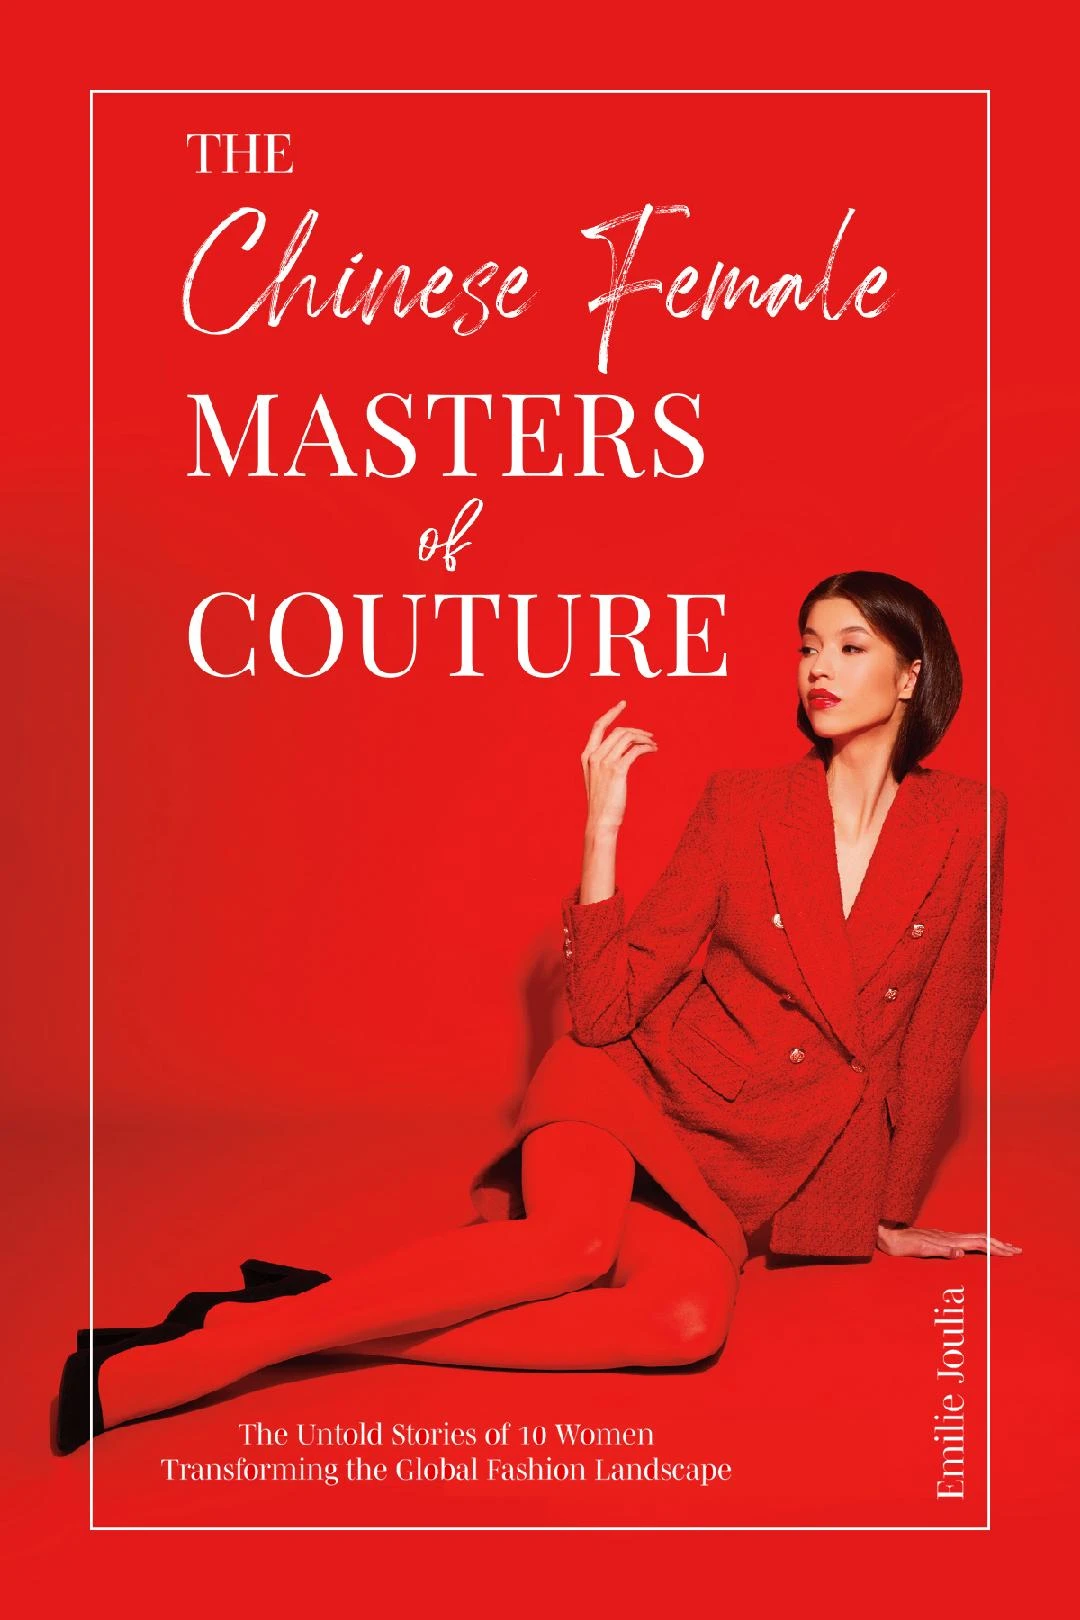 The Chinese Female Masters of Couture